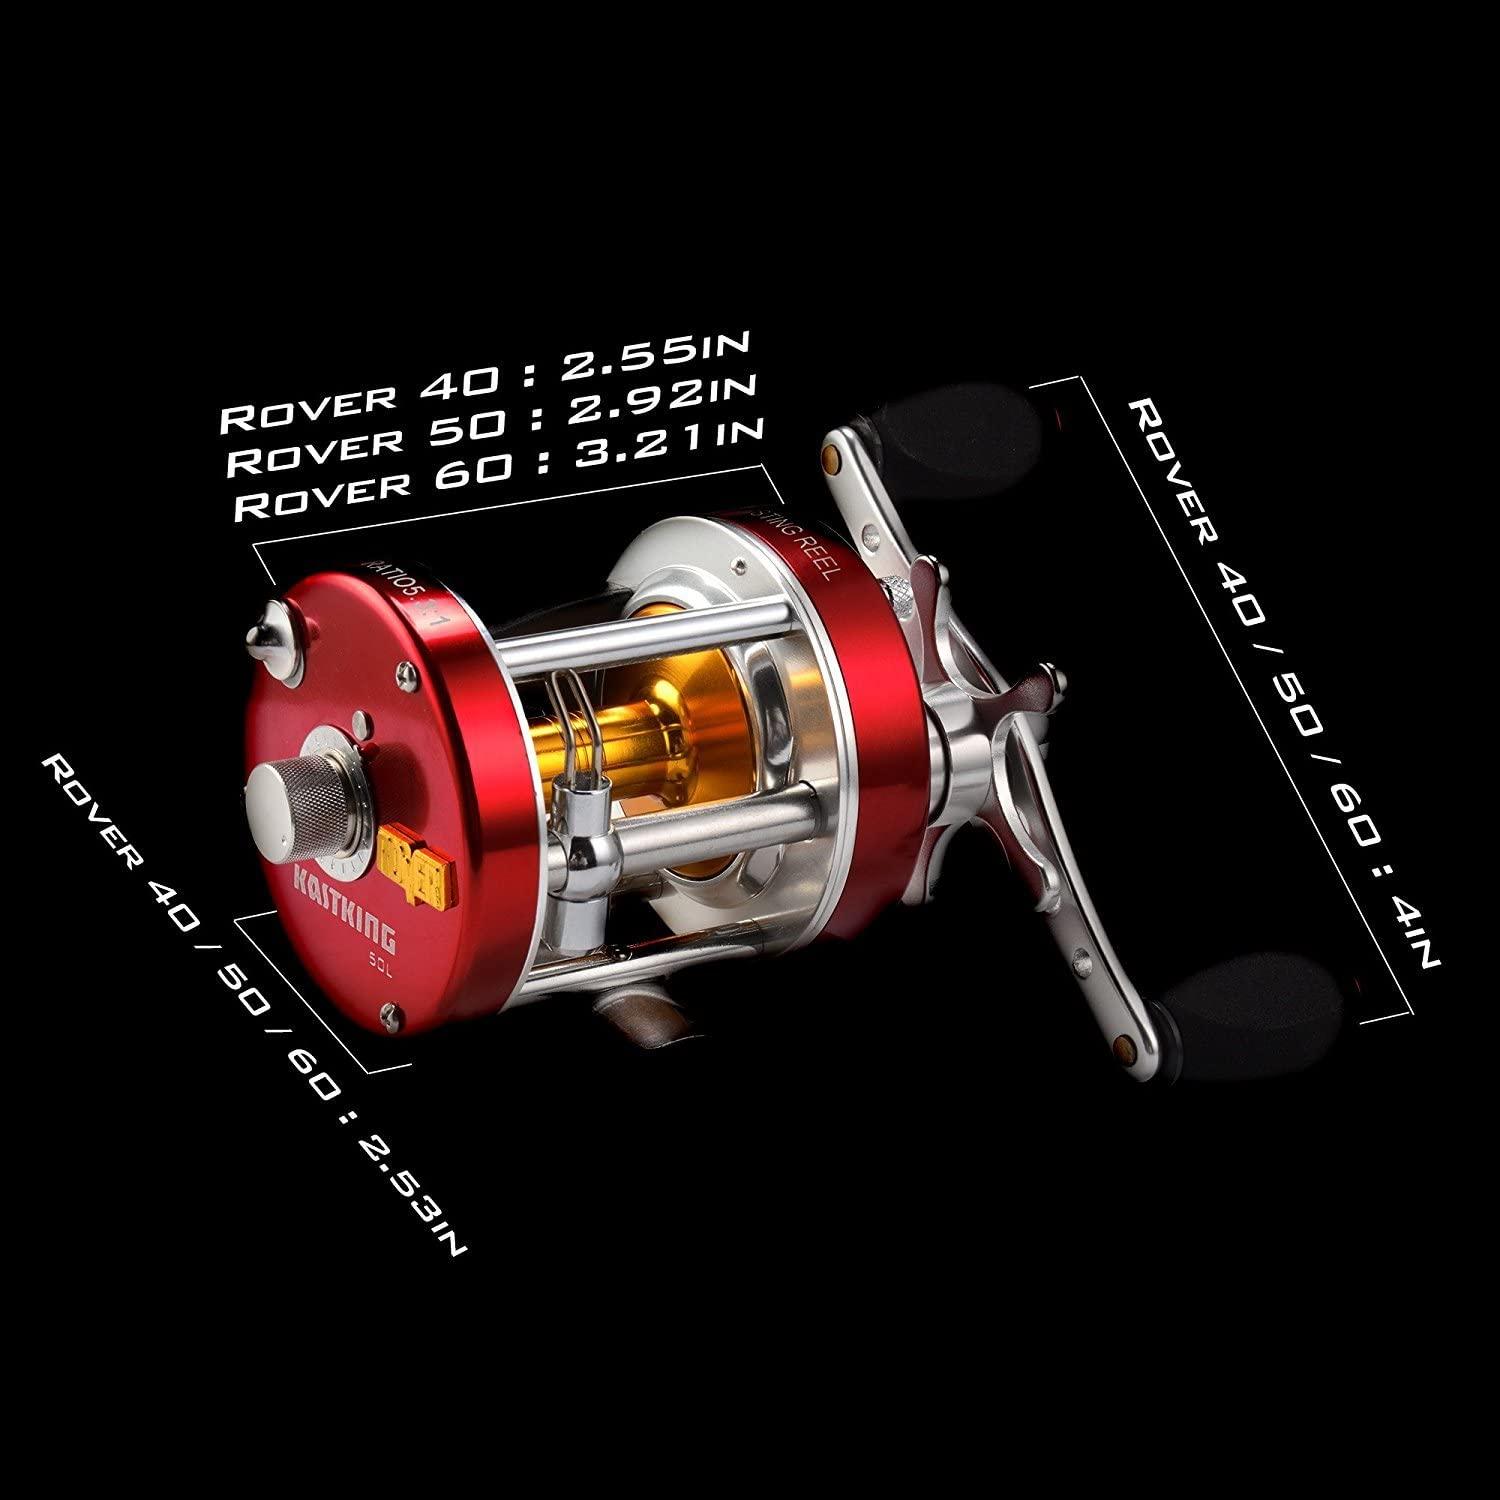 KastKing Rover Round Baitcasting Reel, Perfect Conventional Reel for  Catfish, Salmon/Steelhead, Striper Bass and Inshore Saltwater Fishing -  No.1 Highest Rated Conventional Reel, Reinforced Metal Body A: Right-Rover60